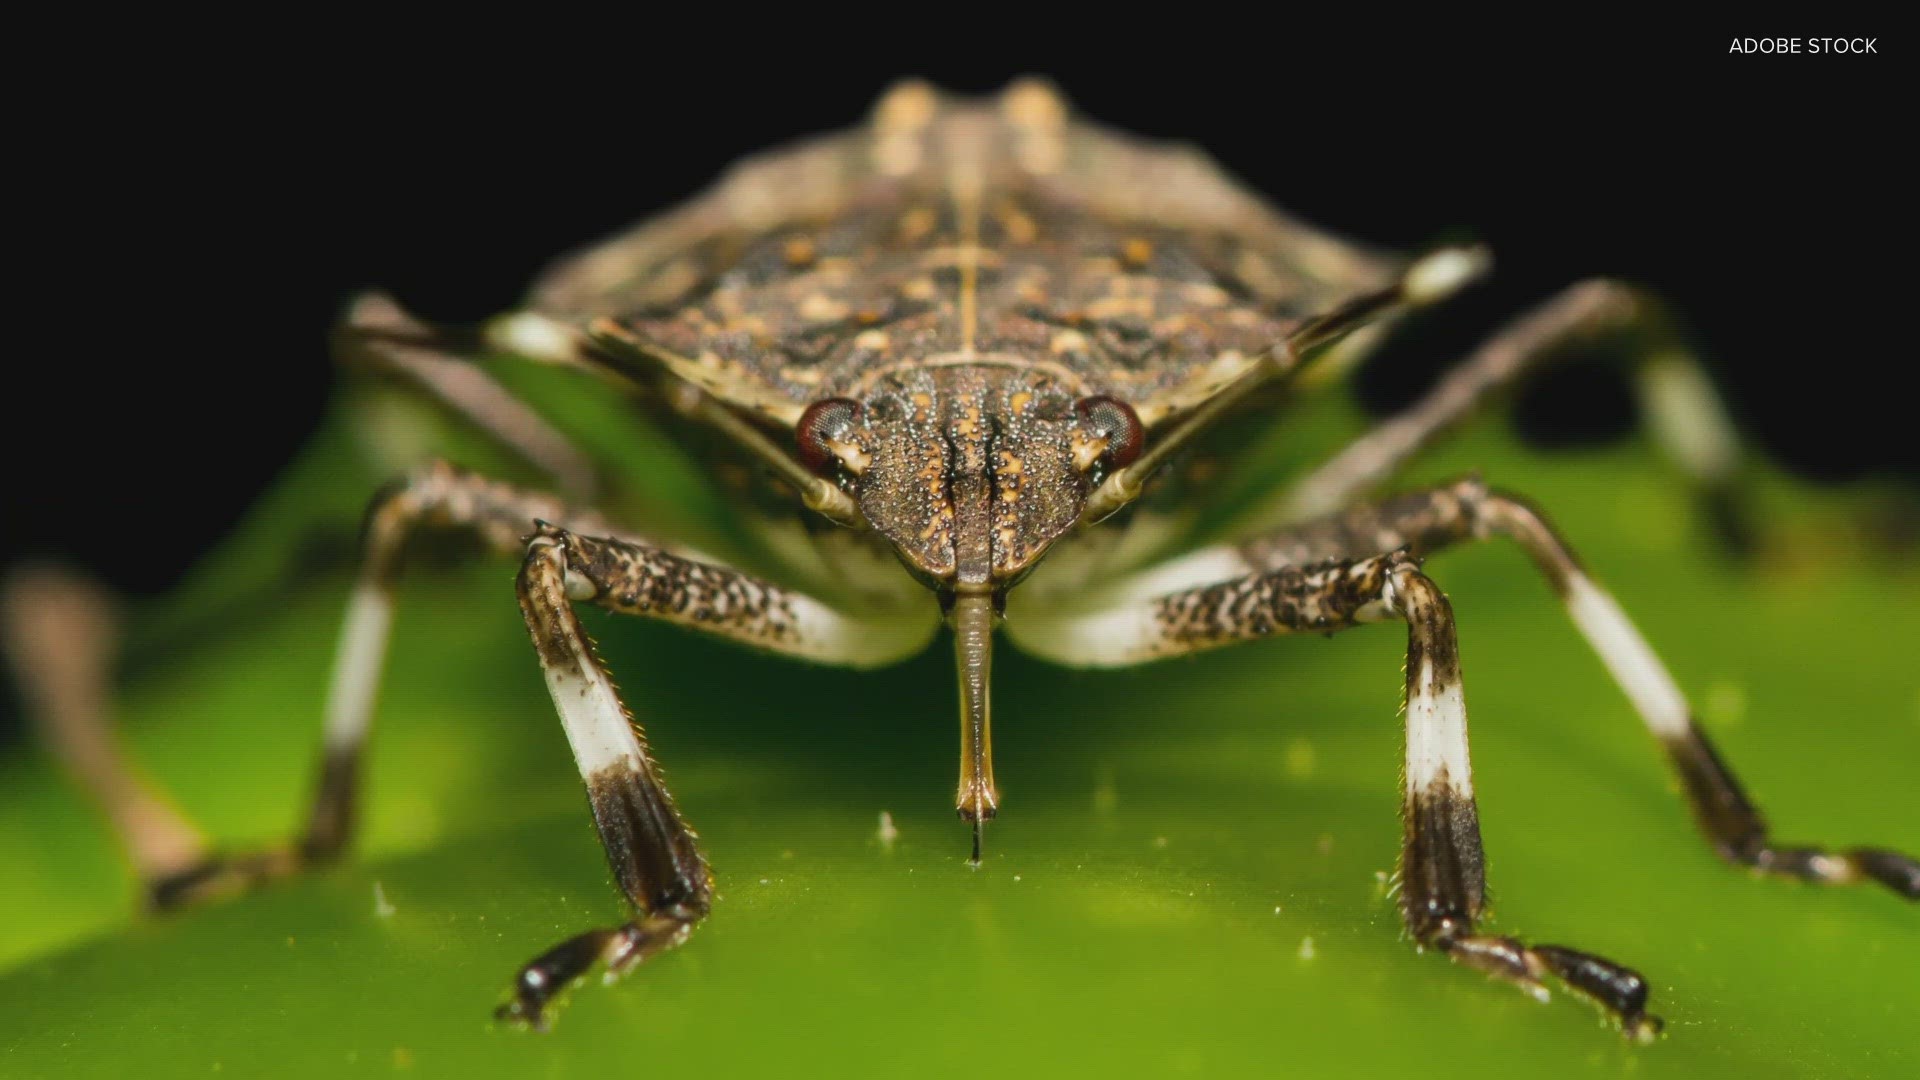 Stink bugs: The good, the bad, and how to get rid of them